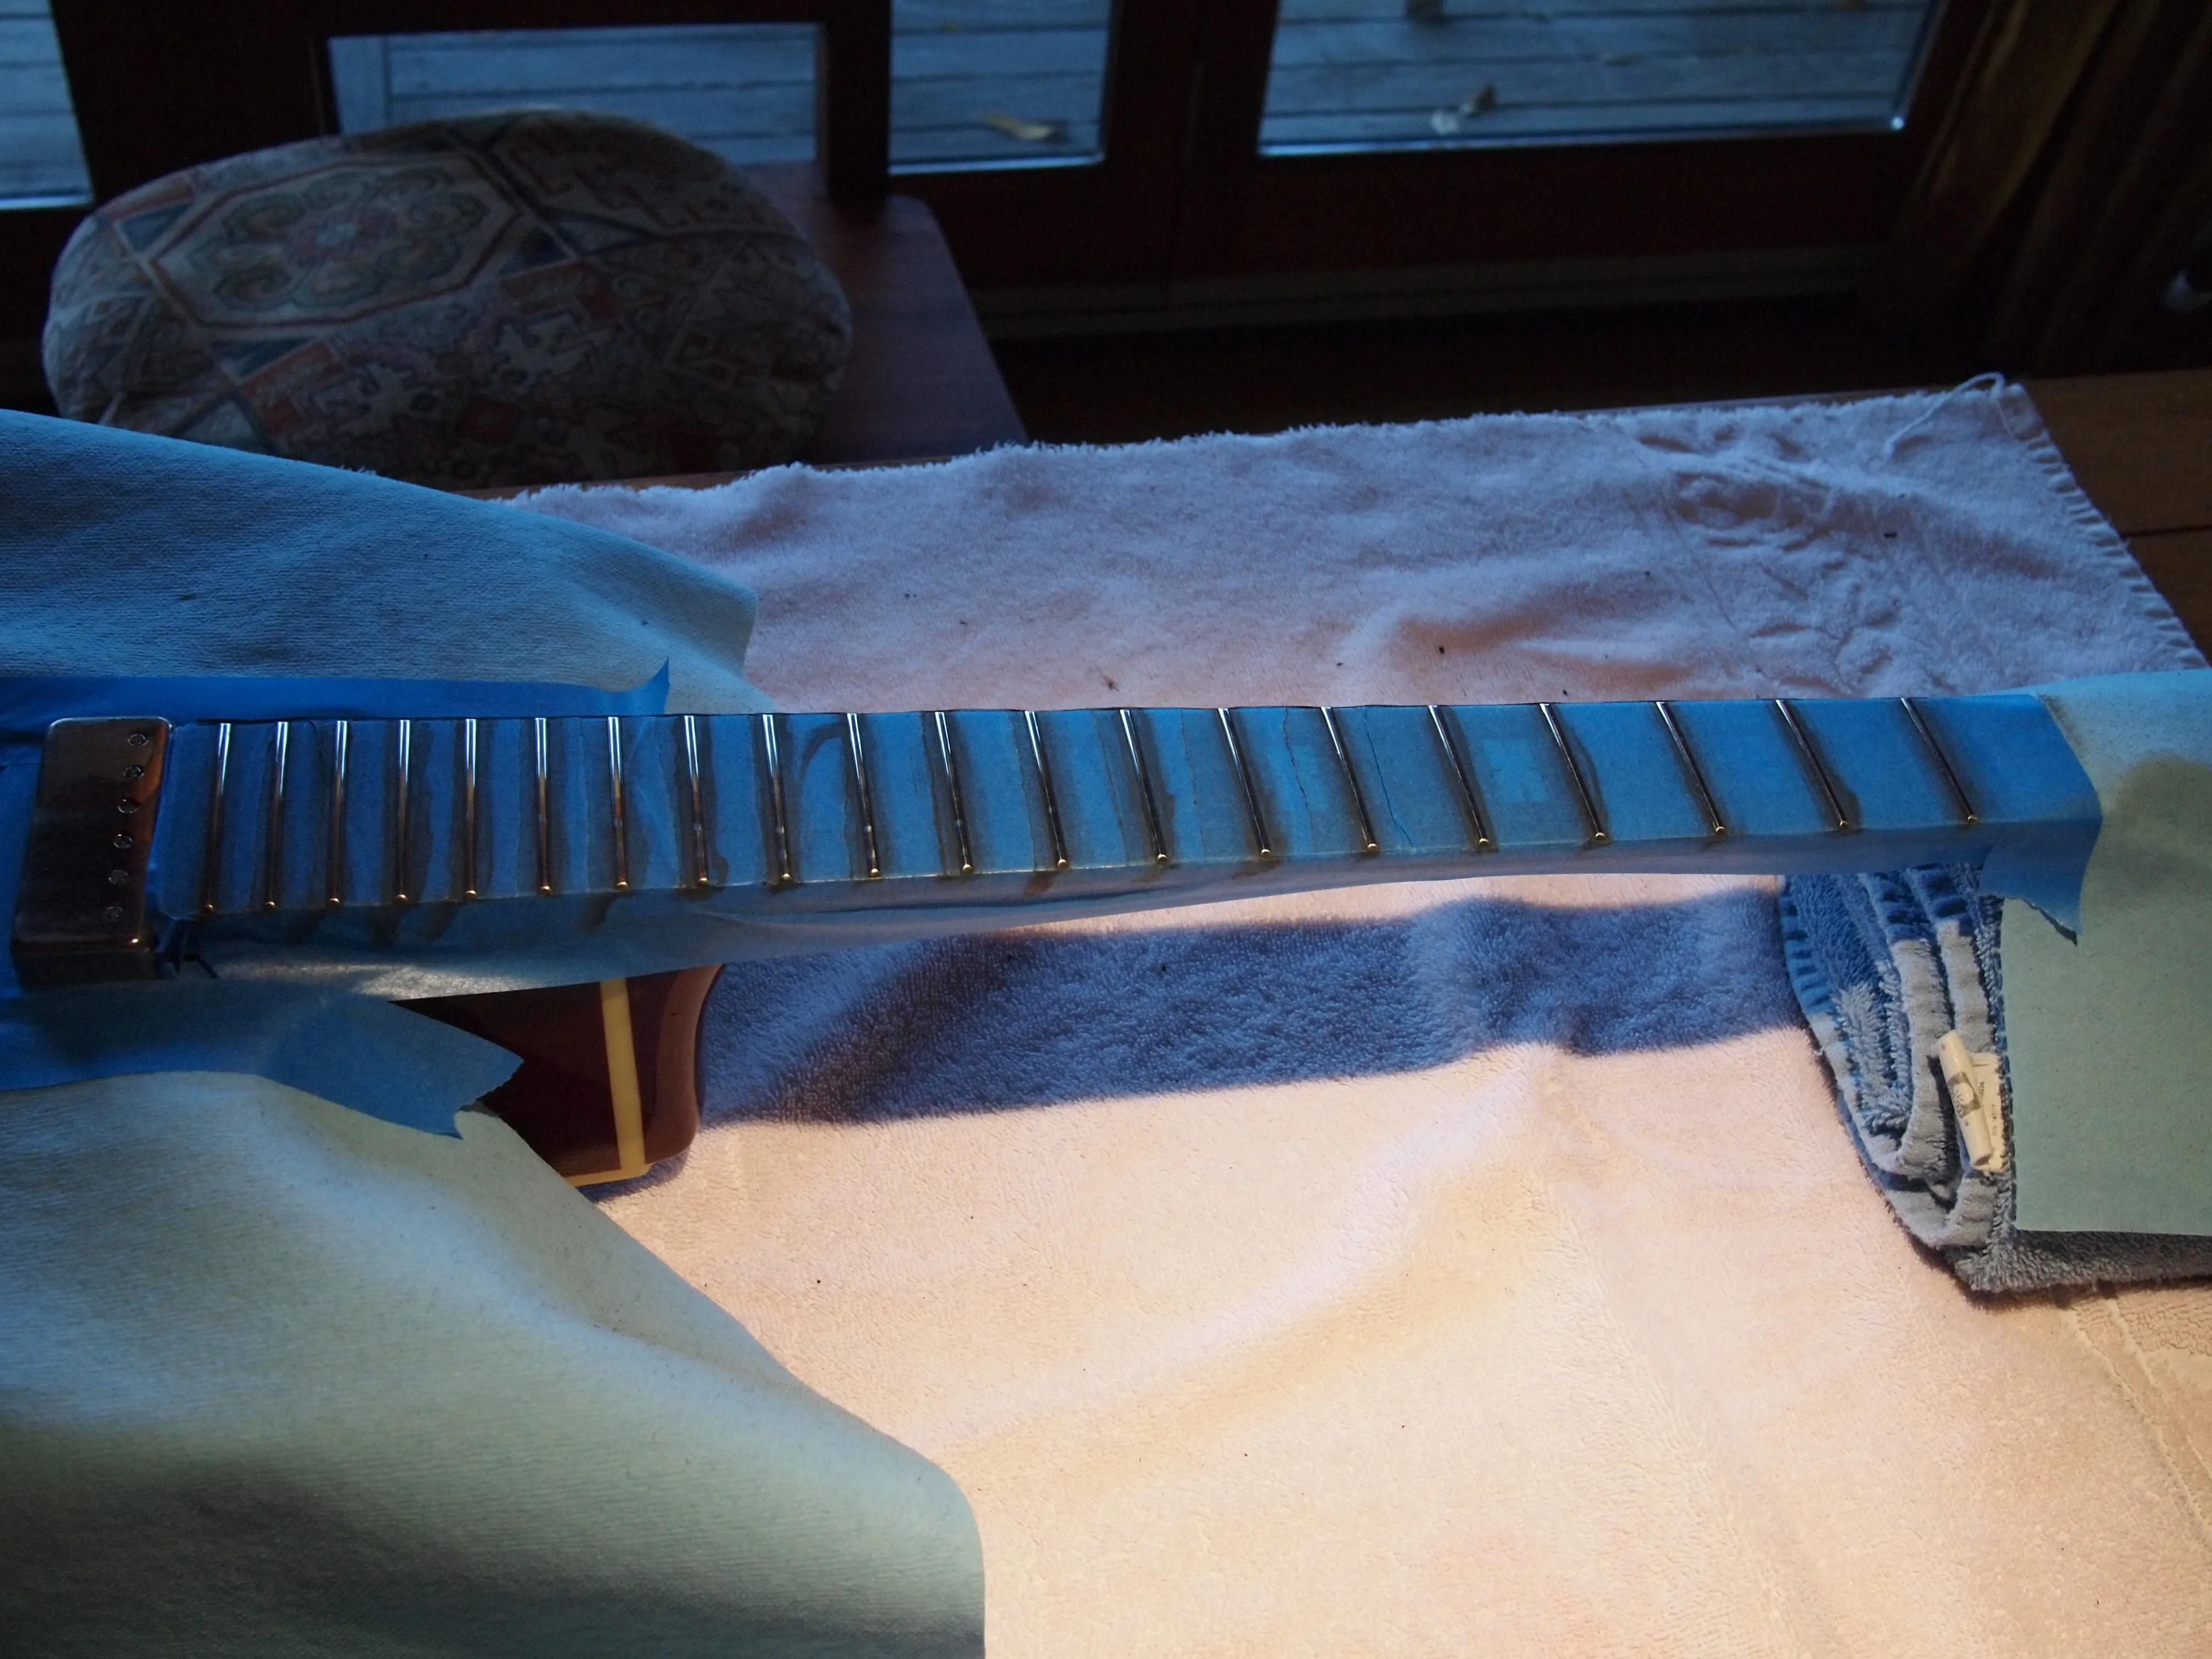 All frets polished and shiny, ready to remove the tape.